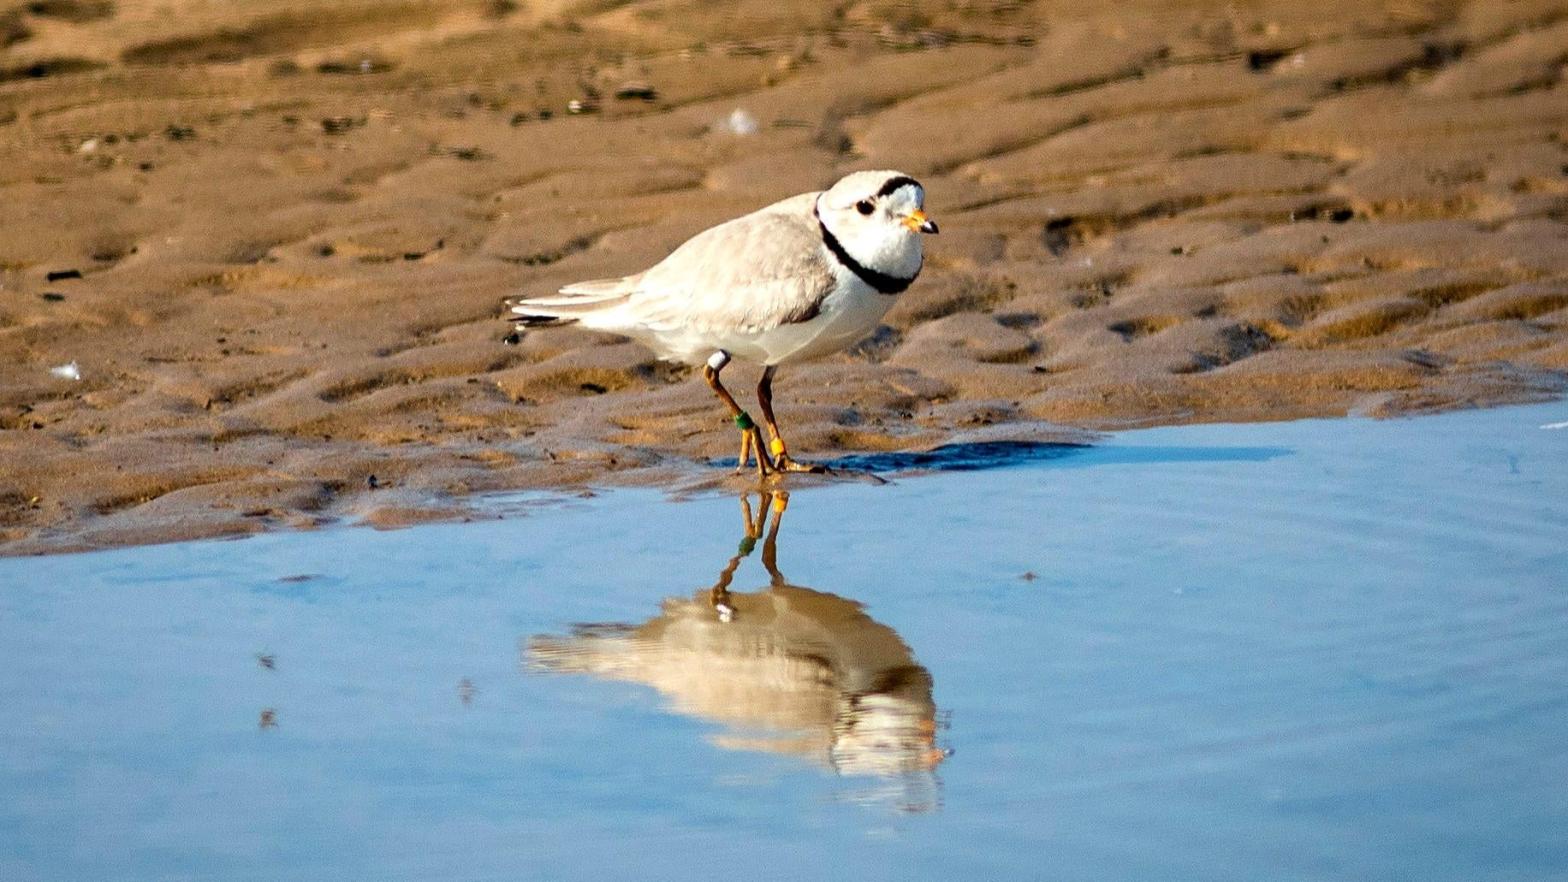 Piping plovers like the one here spend their winters along the Gulf and Atlantic coasts of the United States. At the Texas SpaceX launch site, the birds' vacation spot has become decidedly less ideal.  (Photo: Ashlee Rezin /AP, AP)